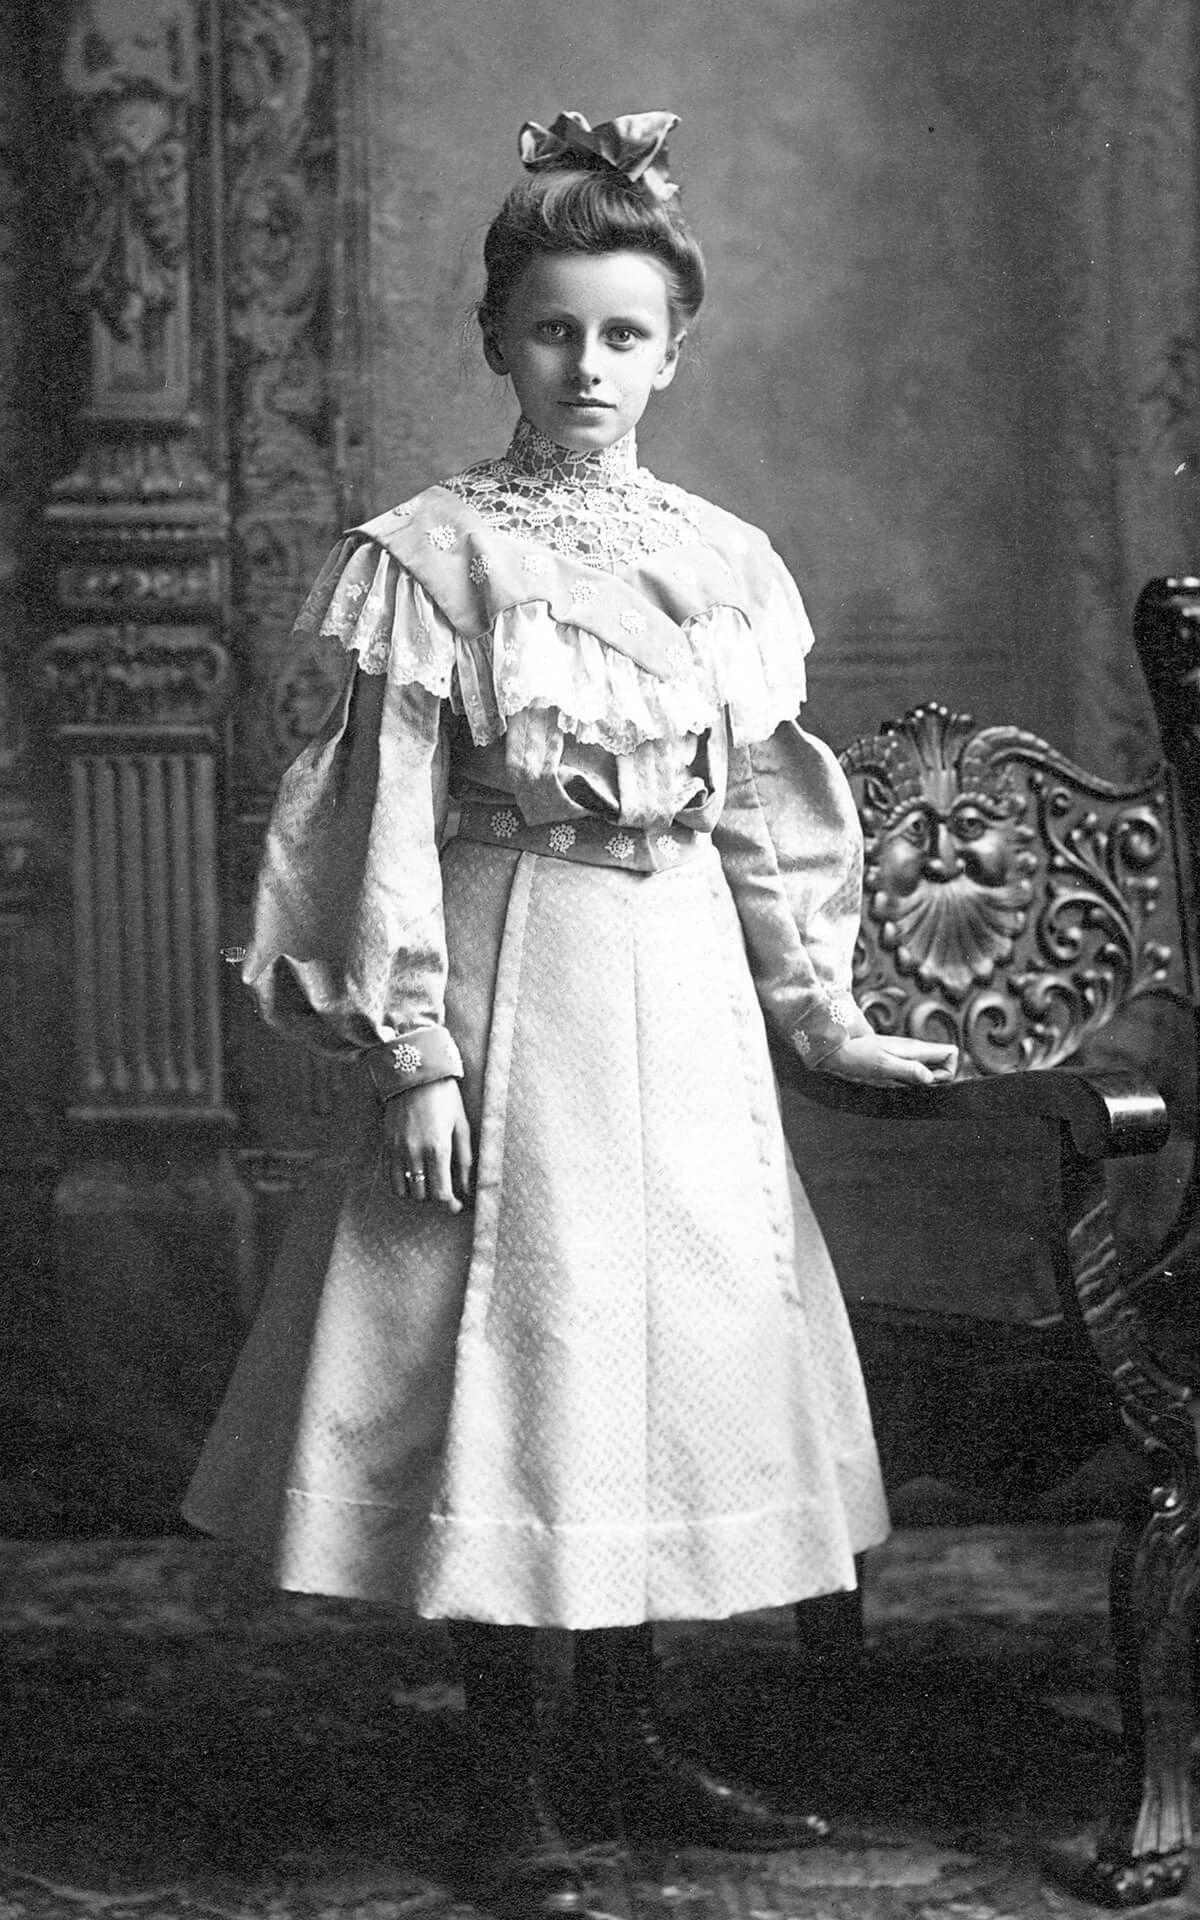 Portrait of Katie Mau, wearing a lightly patterned floral and lace dress, with her hand resting on a chair that features a bearded face carved into it. Her dress is shin-length and she is wearing dark boots and stockings.